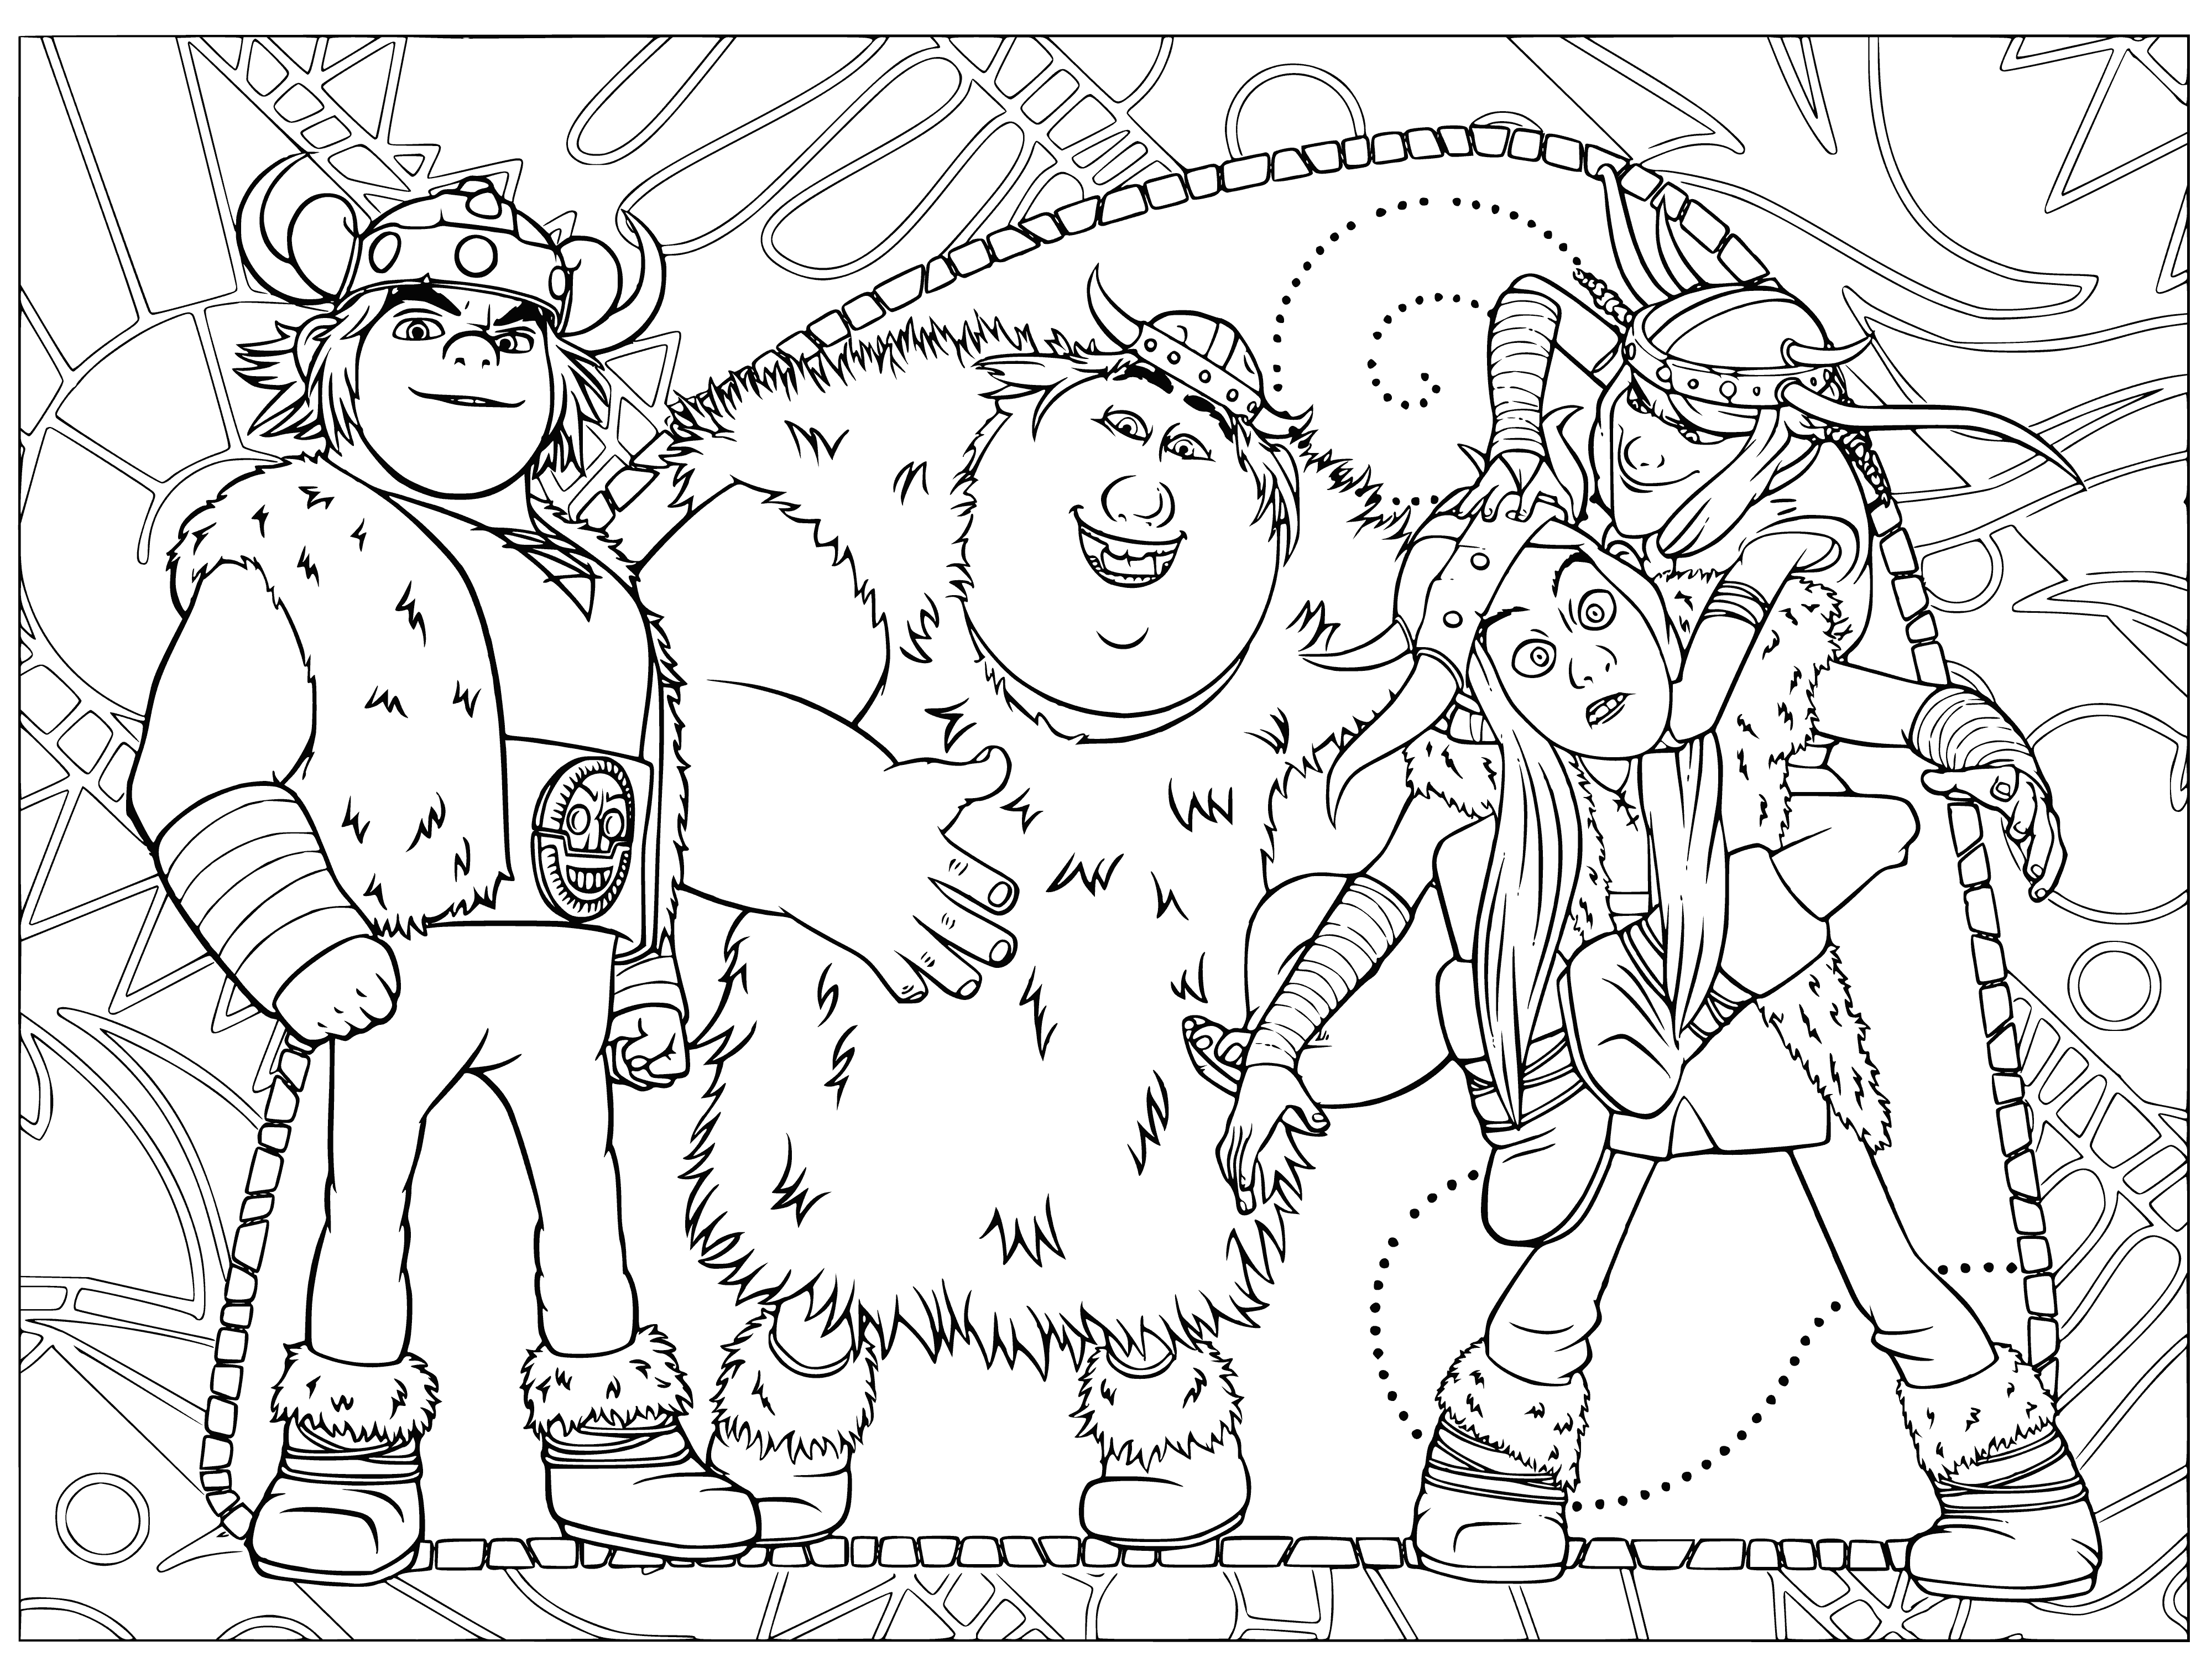 coloring page: Friends of Hiccup are riders of 4 different colored dragons who look happy and excited.